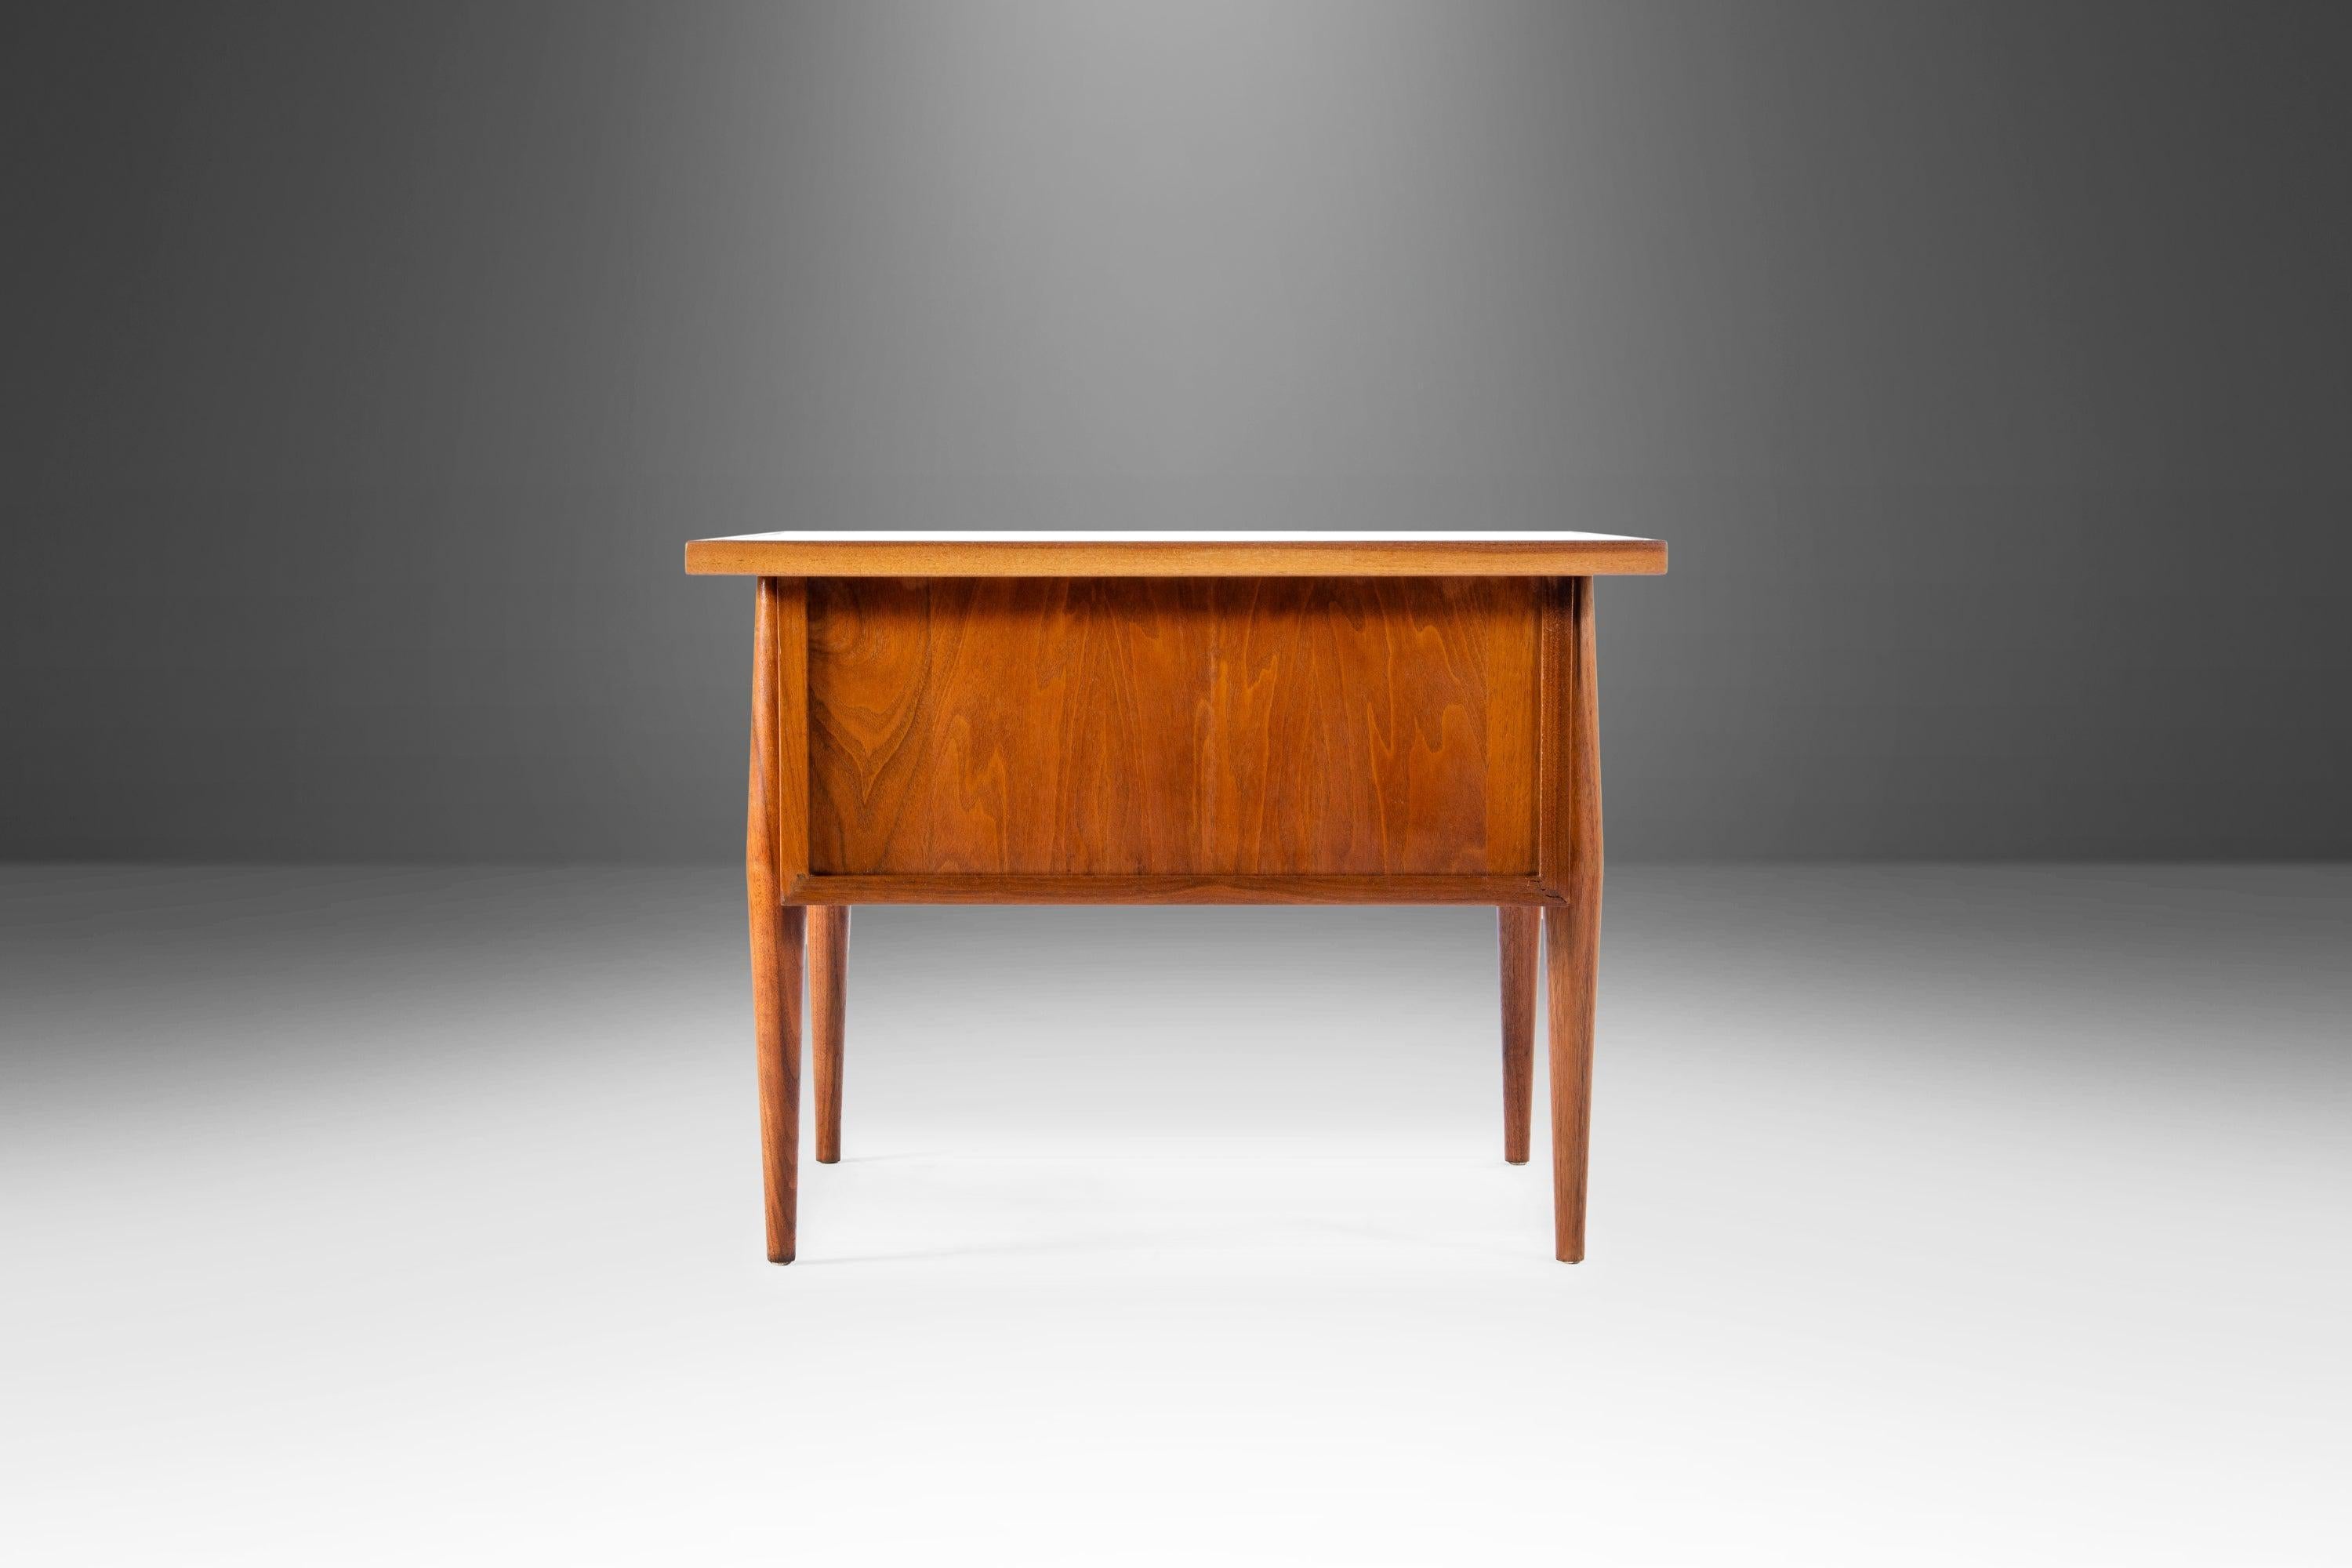 American End Table Table in Cane and Walnut by Jack Cartwright for Founders, USA, c 1960s